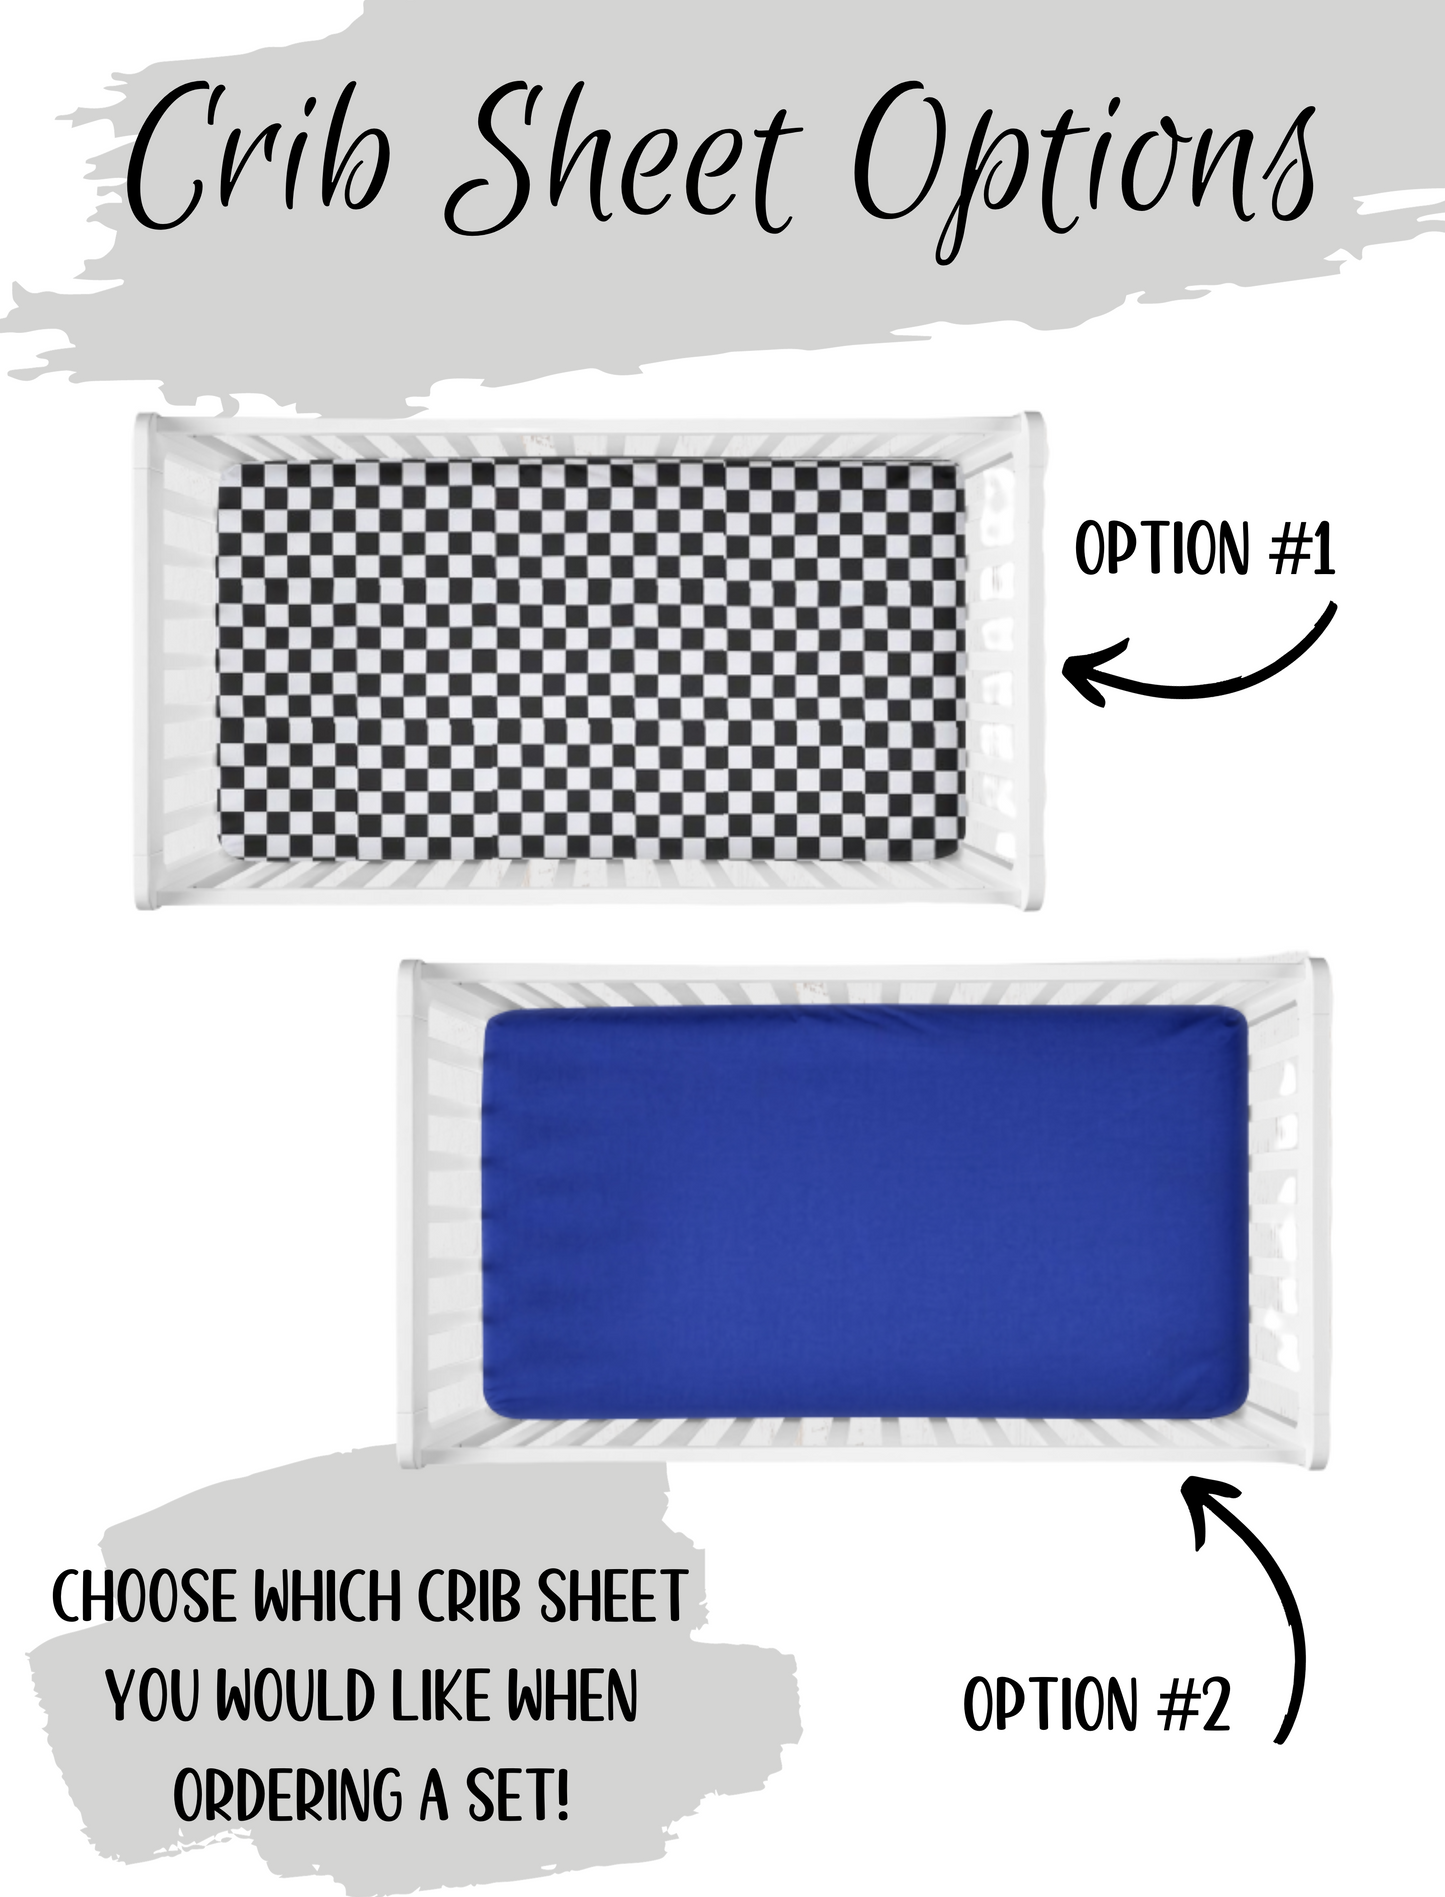 checkered sheet or blue crib sheet options for the set